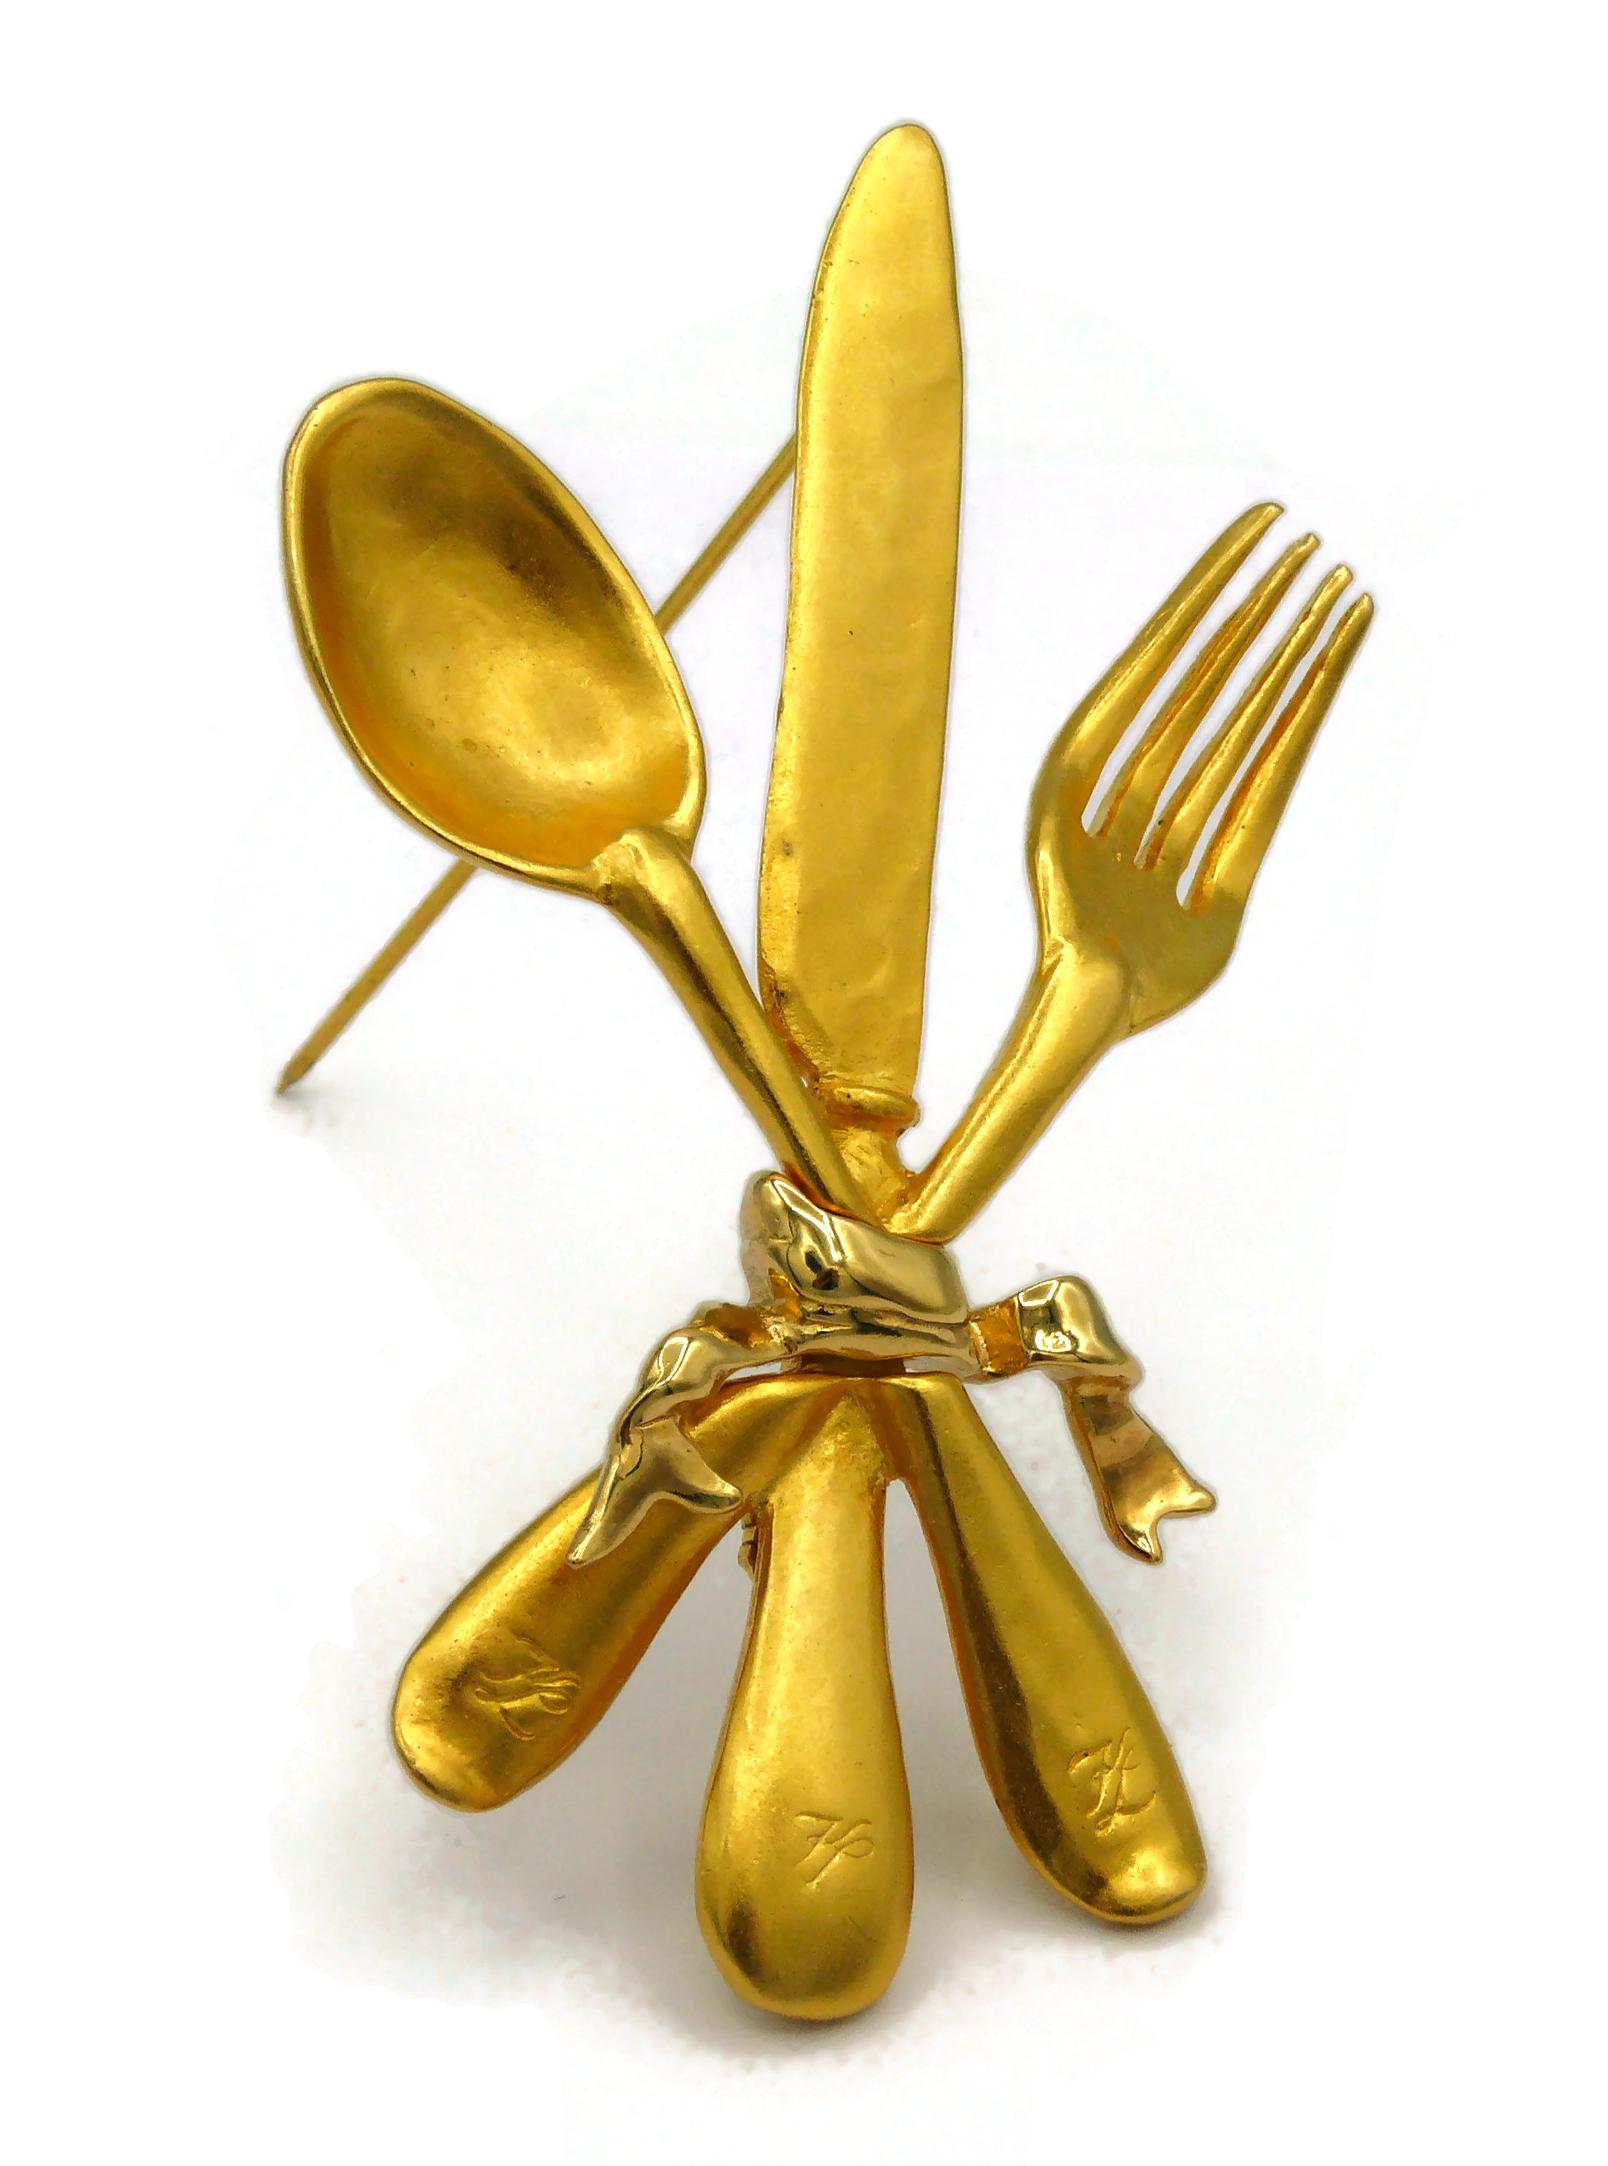 KARL LAGERFELD Vintage Gold Tone Cutlery Set Brooch In Good Condition For Sale In Nice, FR